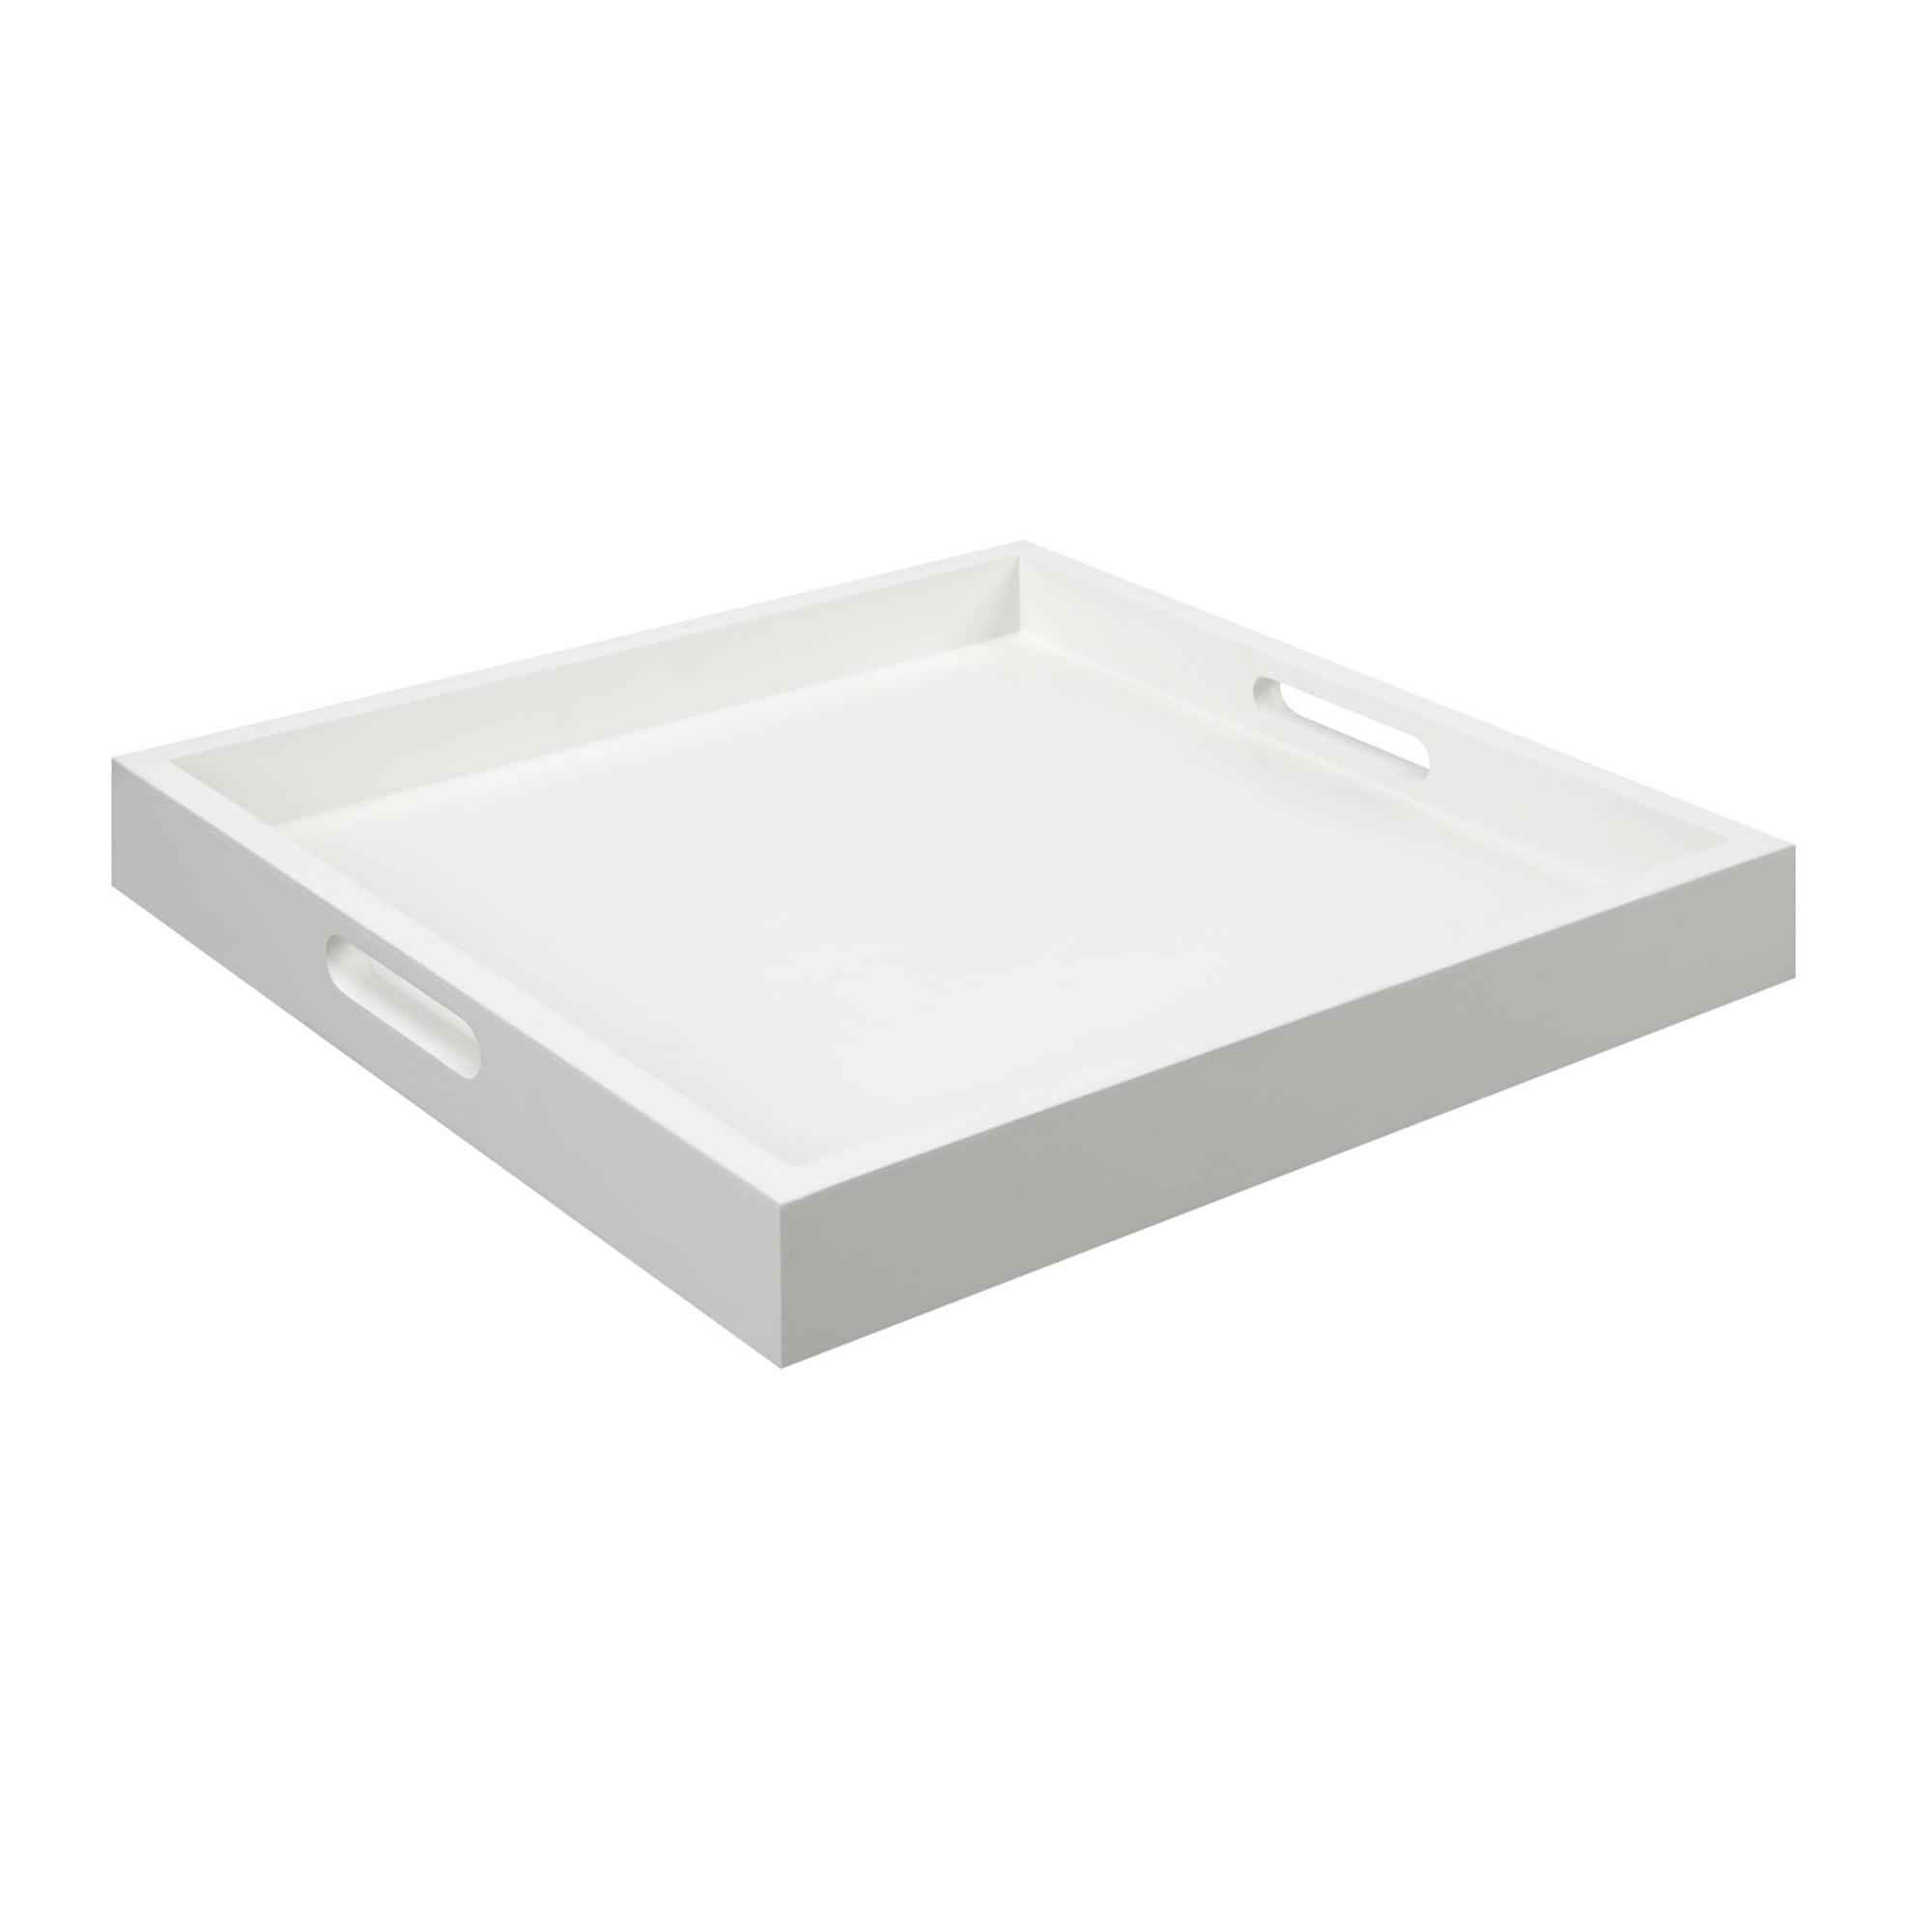 White MDF Palm Beach Tray with Cut Out Handles